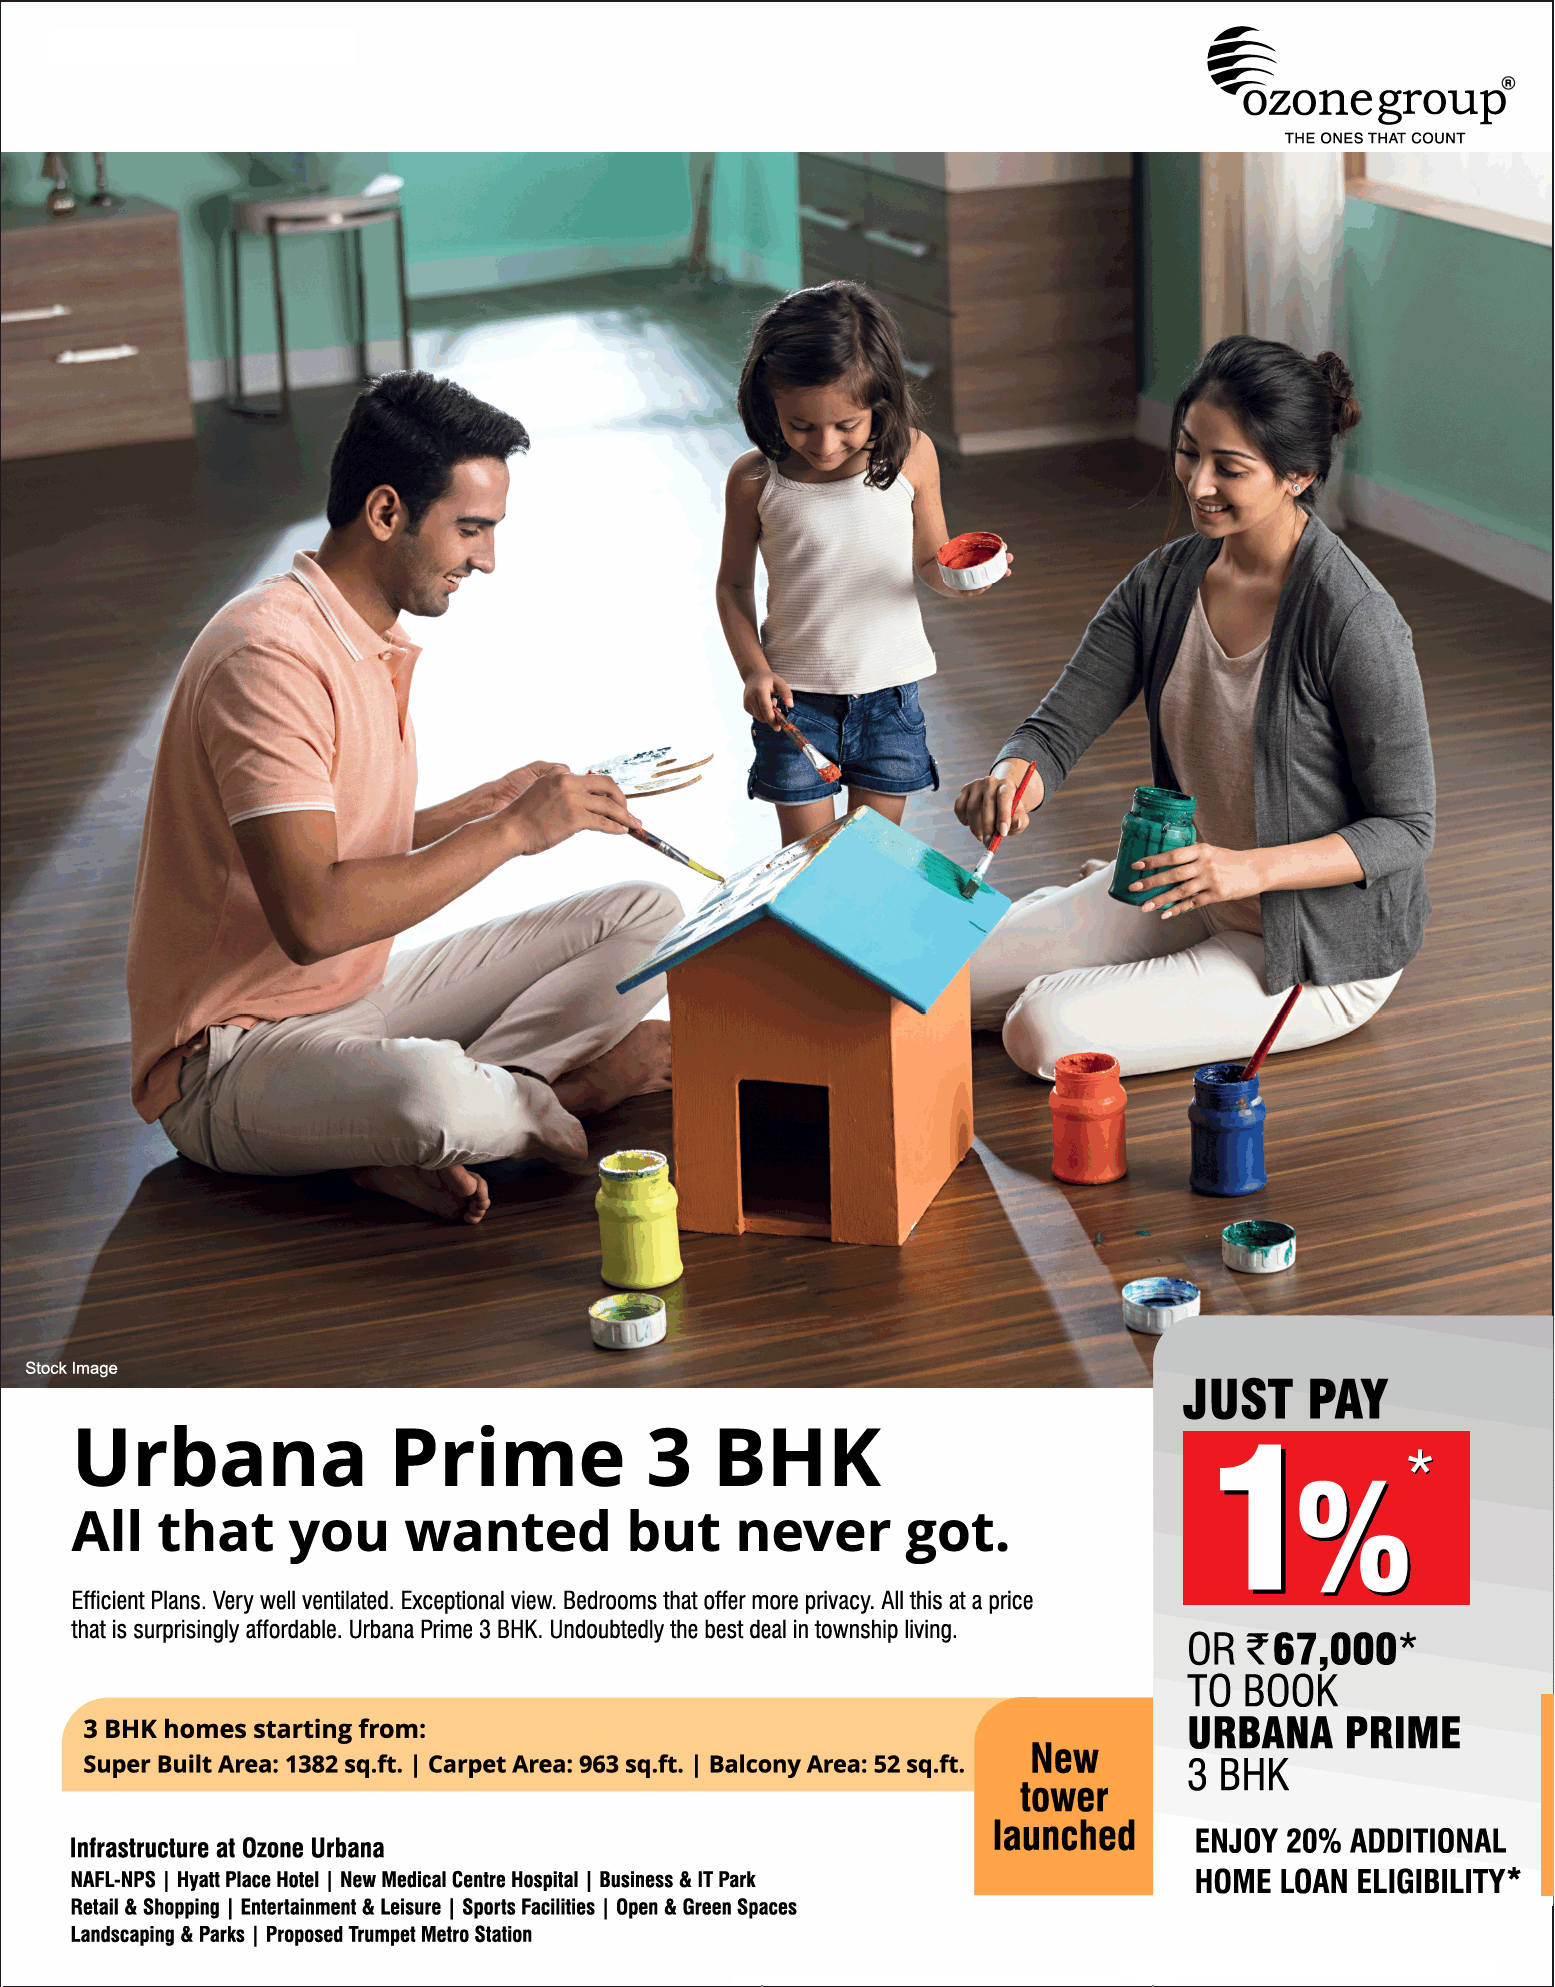 Just Pay 1% or Rs. 67000 to book Urbana Prime 3 bhk in Bangalore